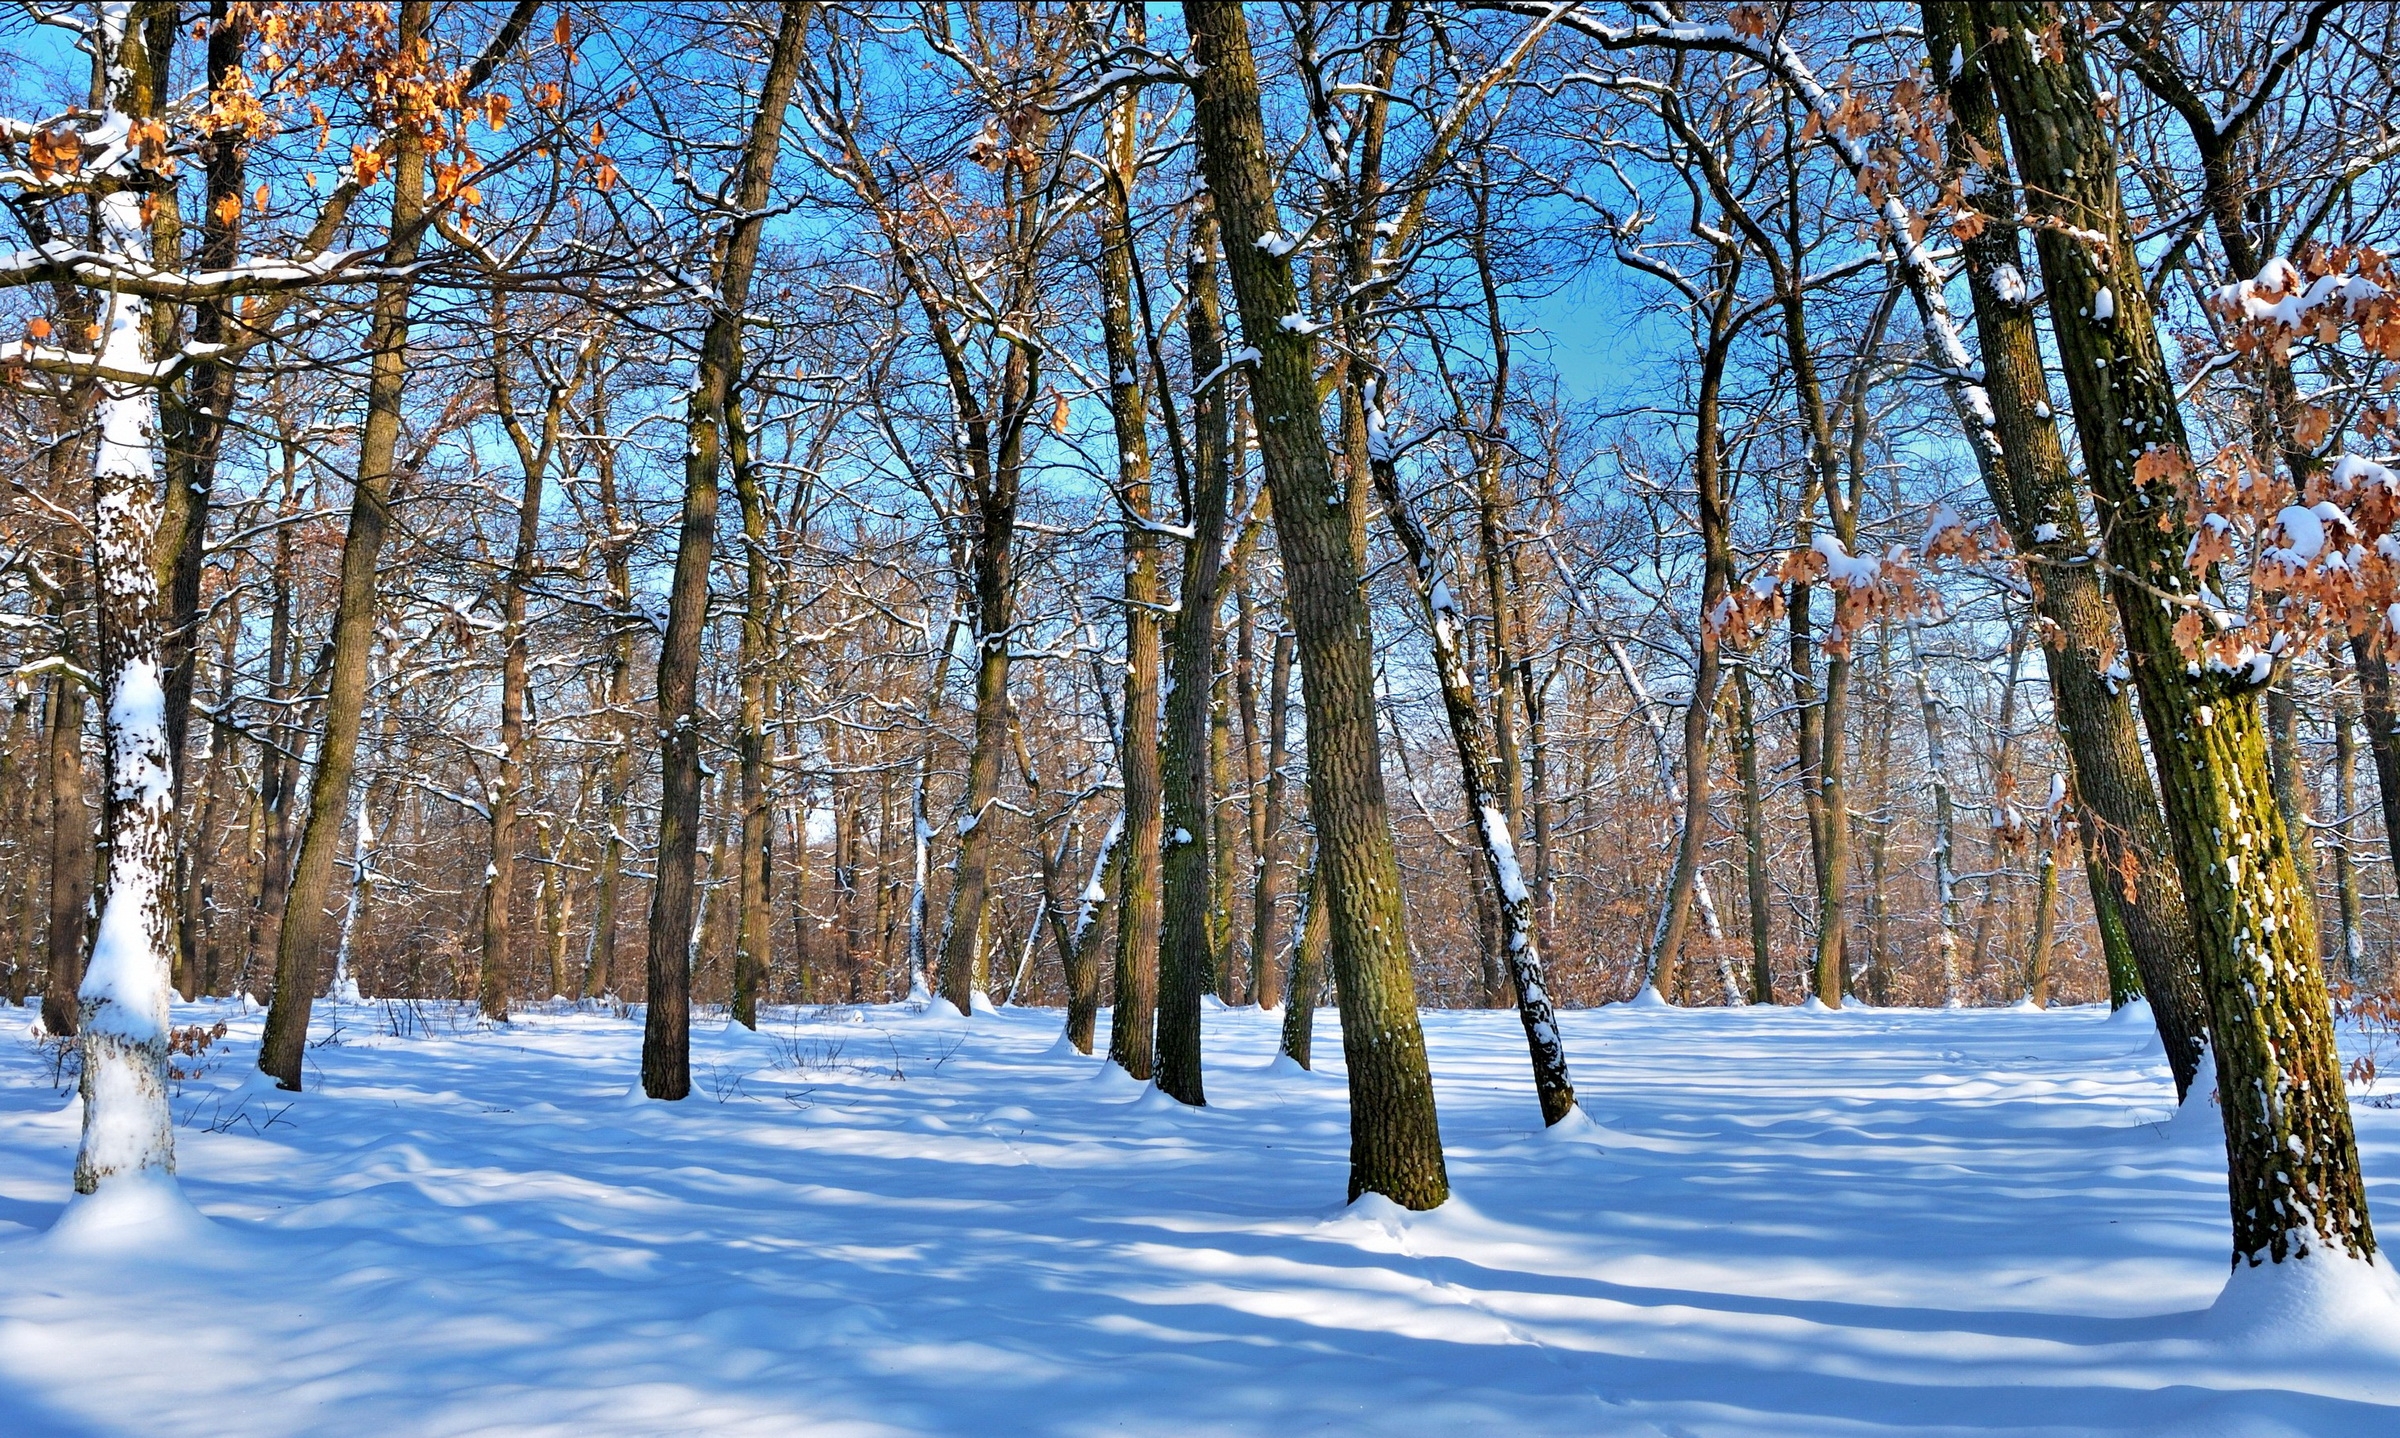 naked, winter, nature, trees, sky, snow, park, trunks, shadows, clear, i see